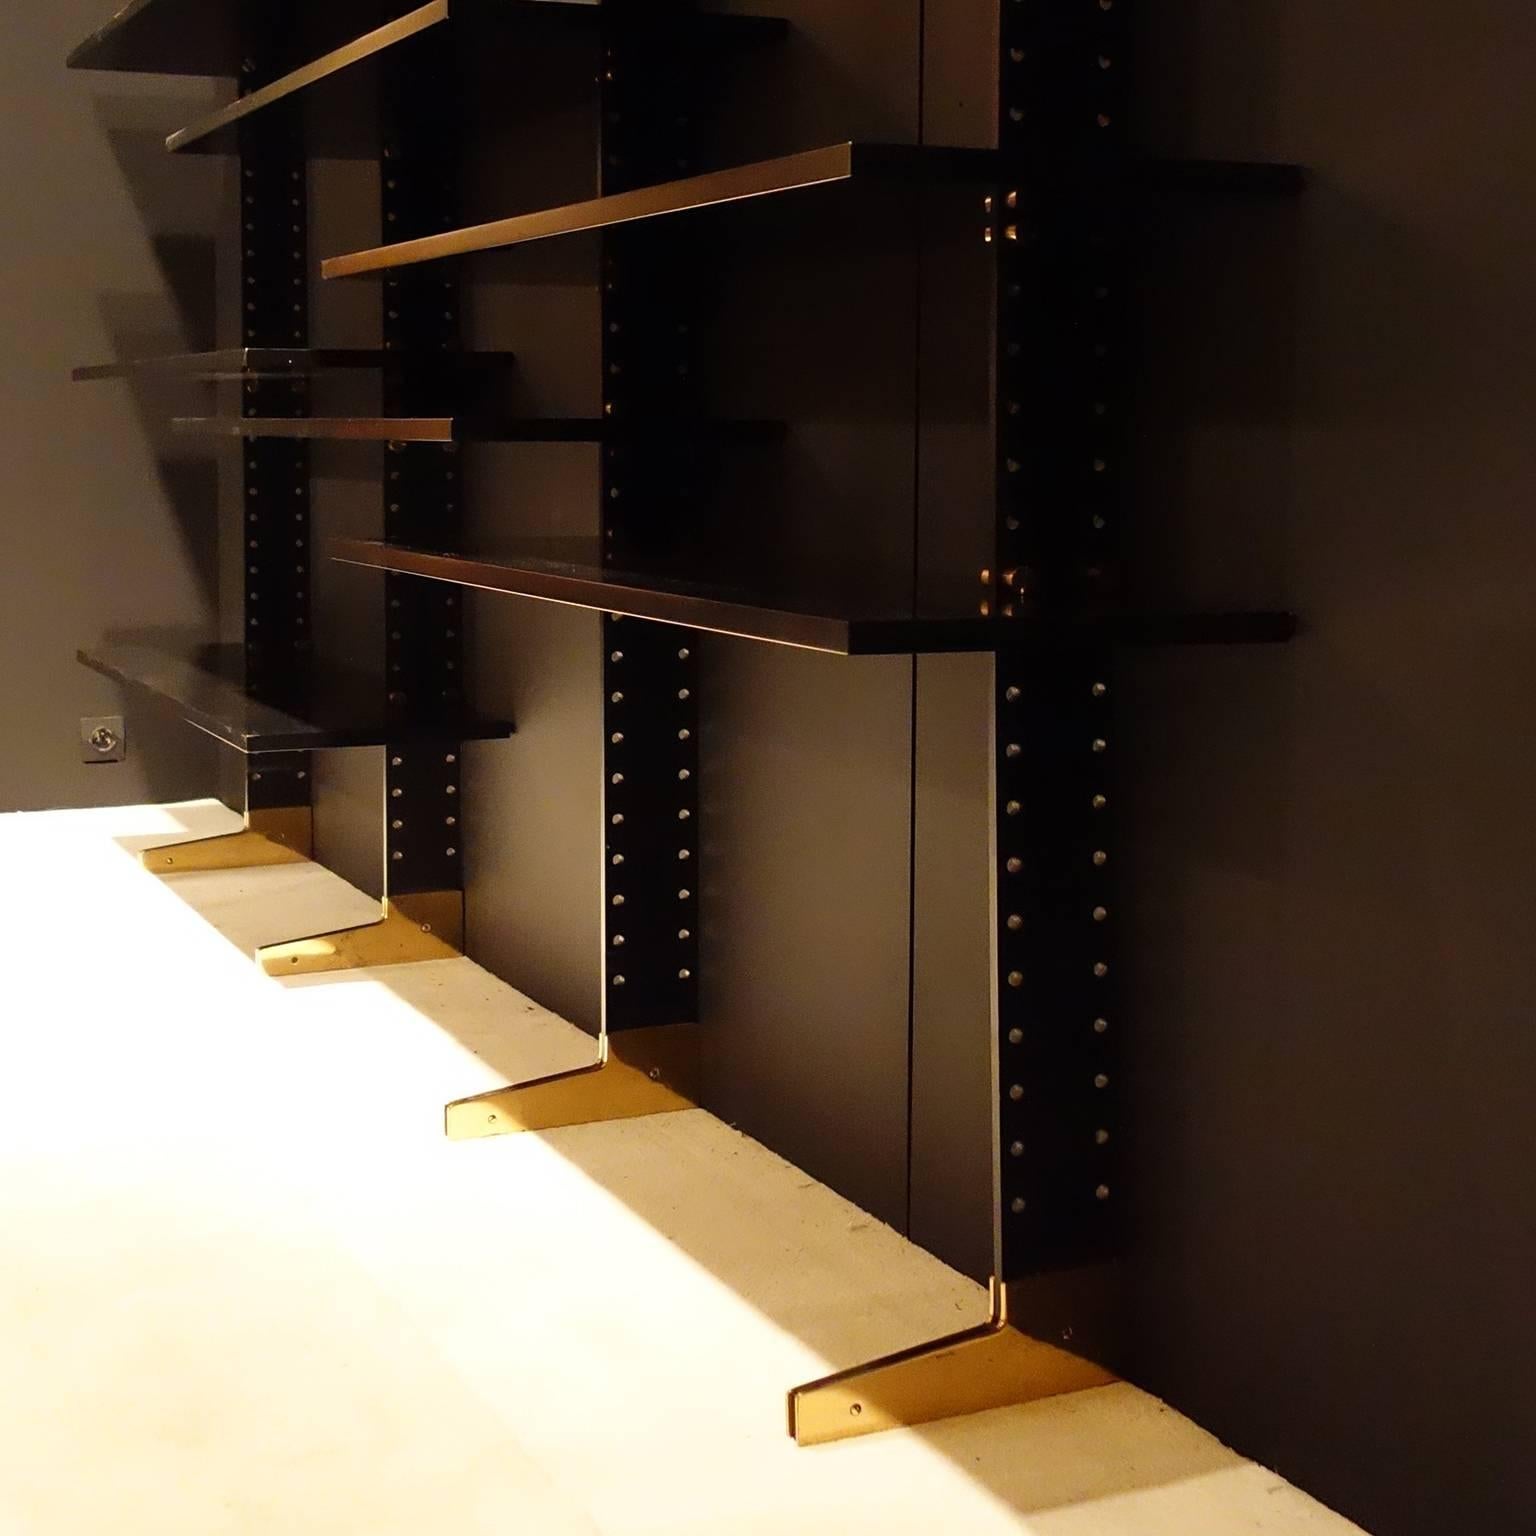 Beautiful bookcase by Ignazio Gardella with modular shelves in very good conditions edited by MisuraEmme inspired by a previous model 